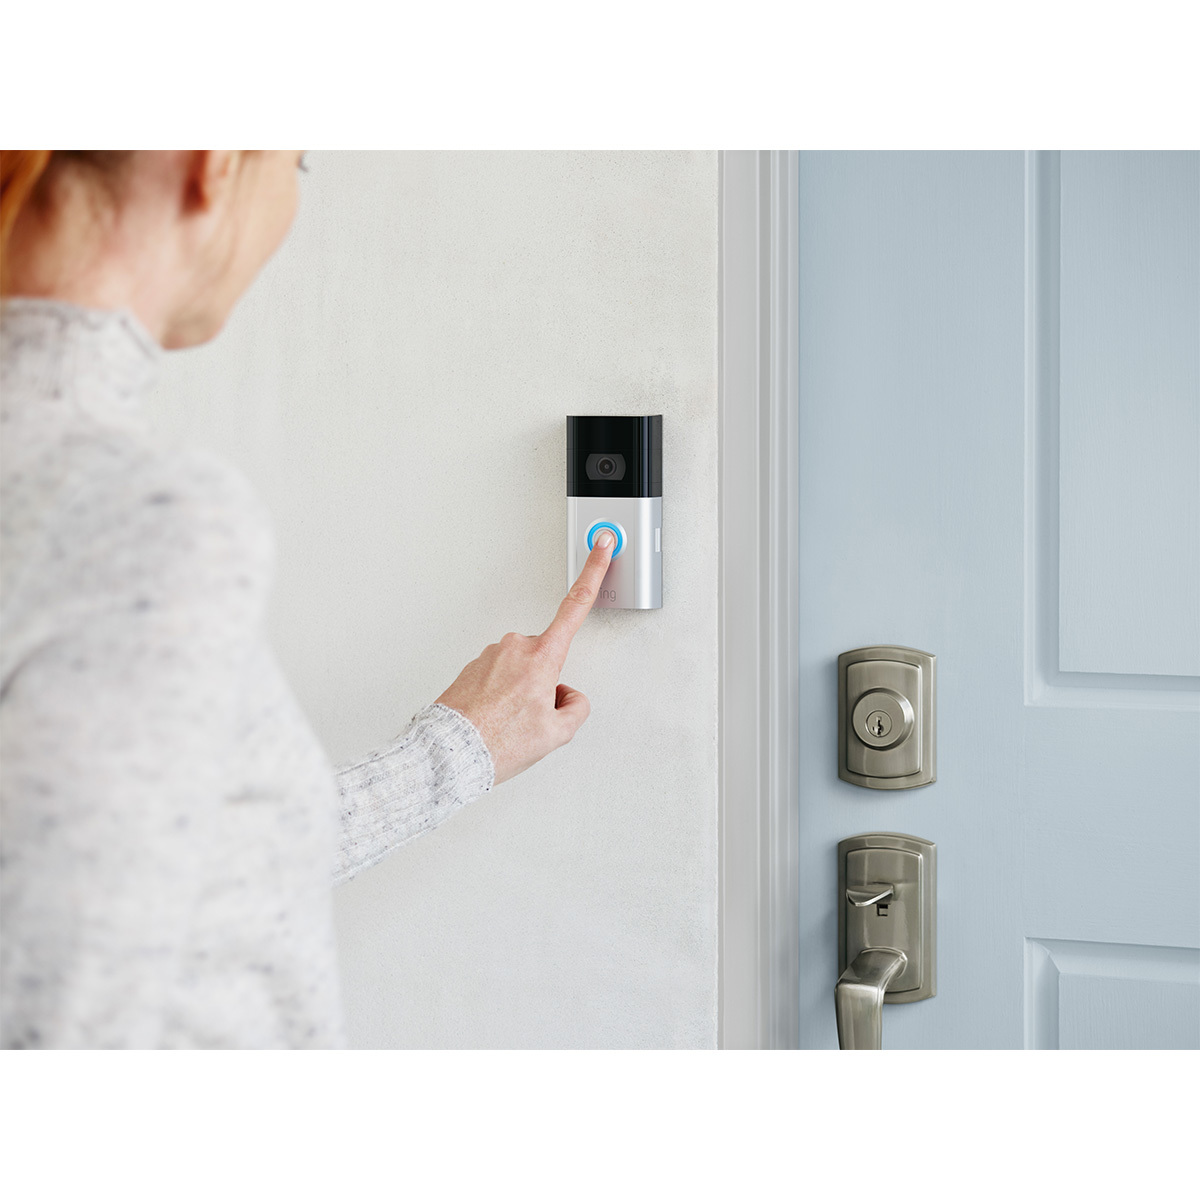 Lifestyle image of ring doorbell in use outside front door